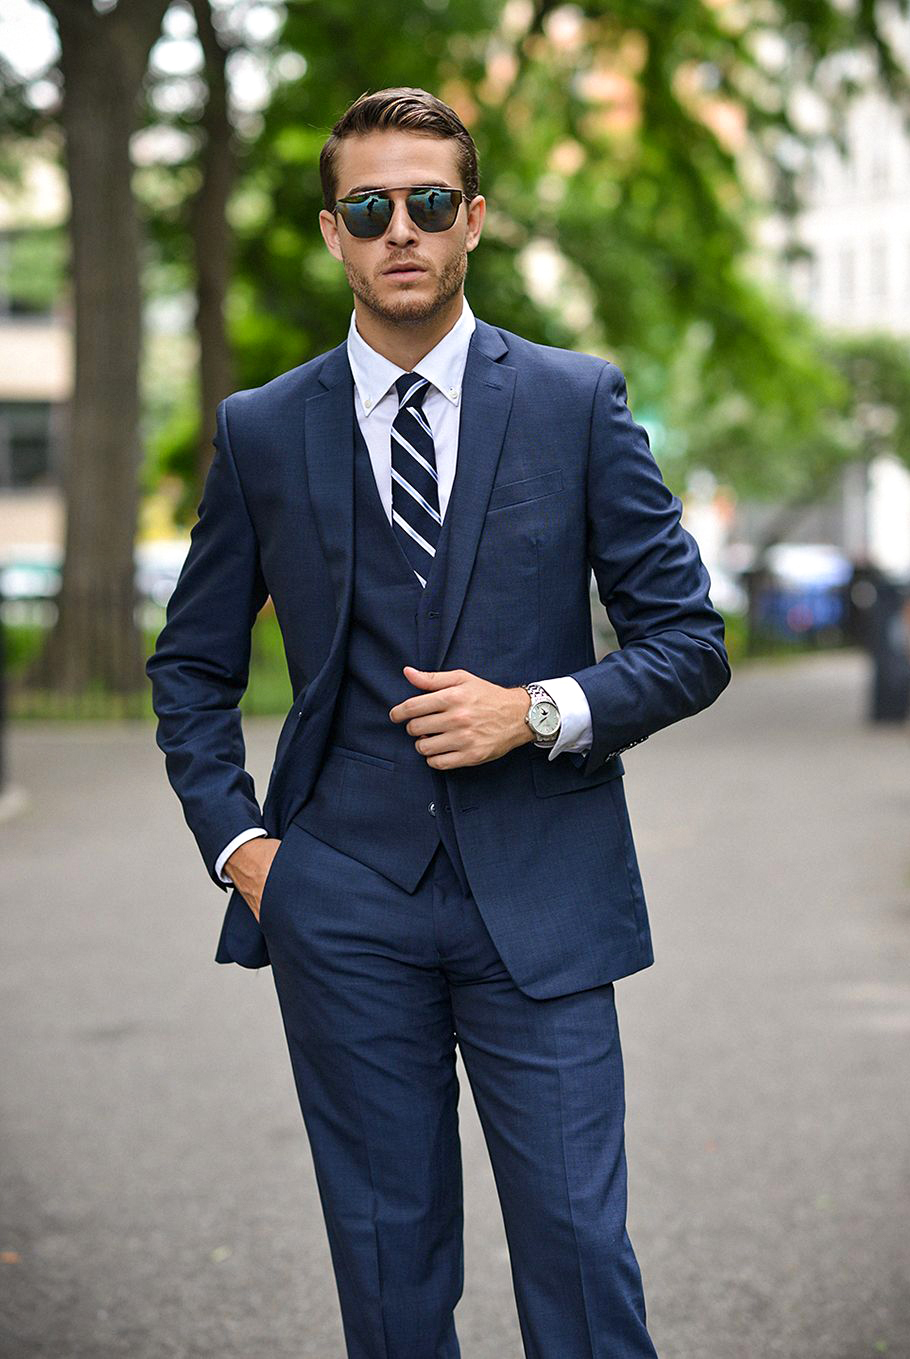 Three-Piece Suits Guide & How to Wear - Suits Expert